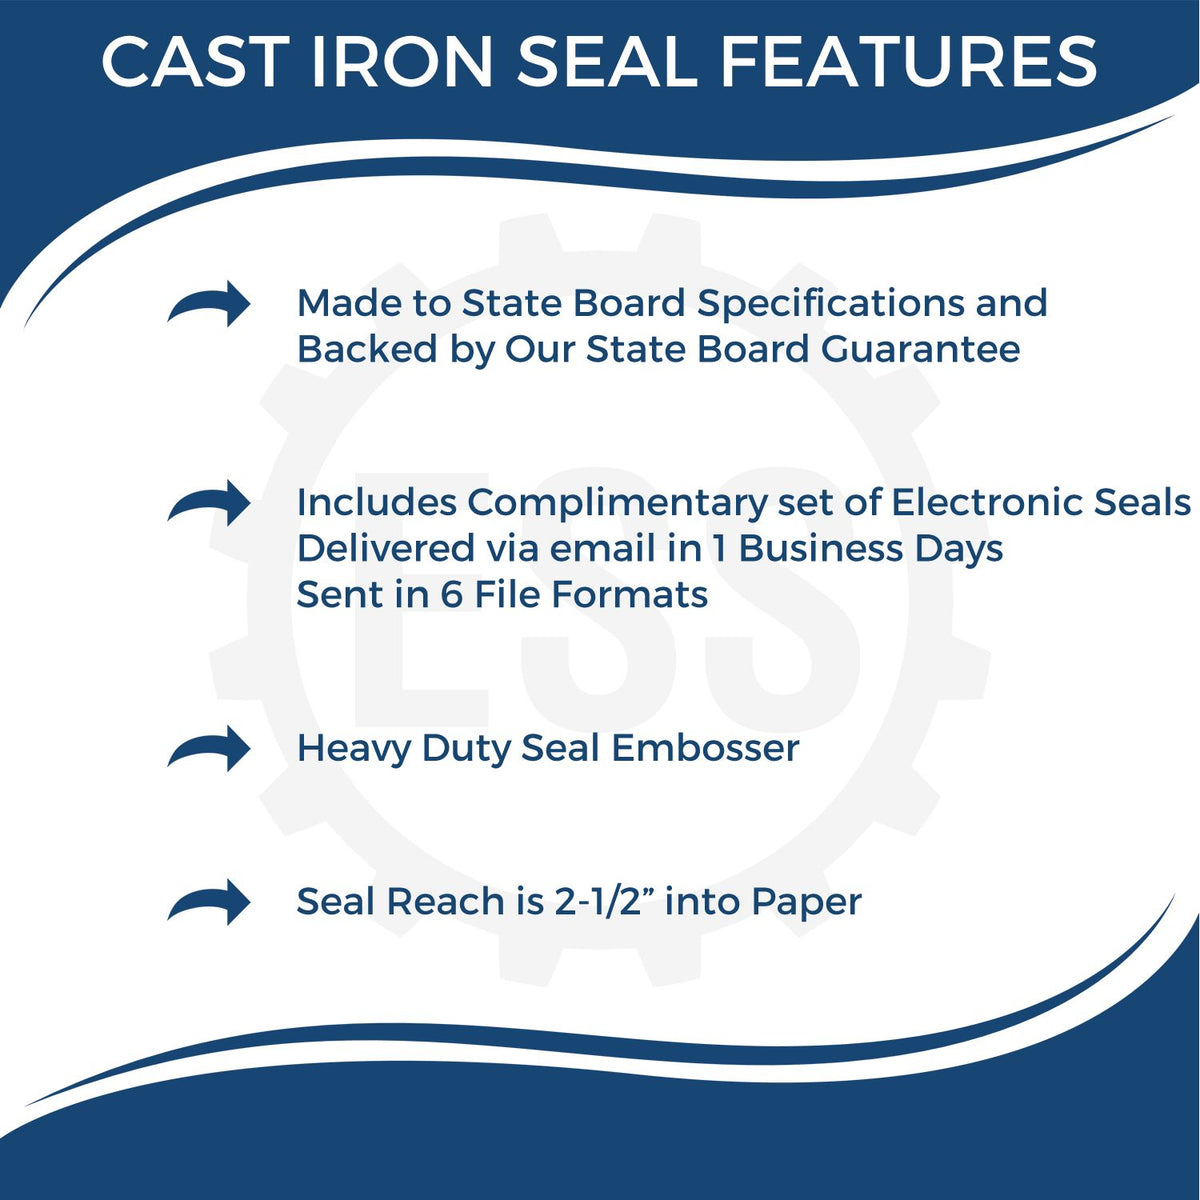 A picture of an infographic highlighting the selling points for the Heavy Duty Cast Iron Alaska Geologist Seal Embosser